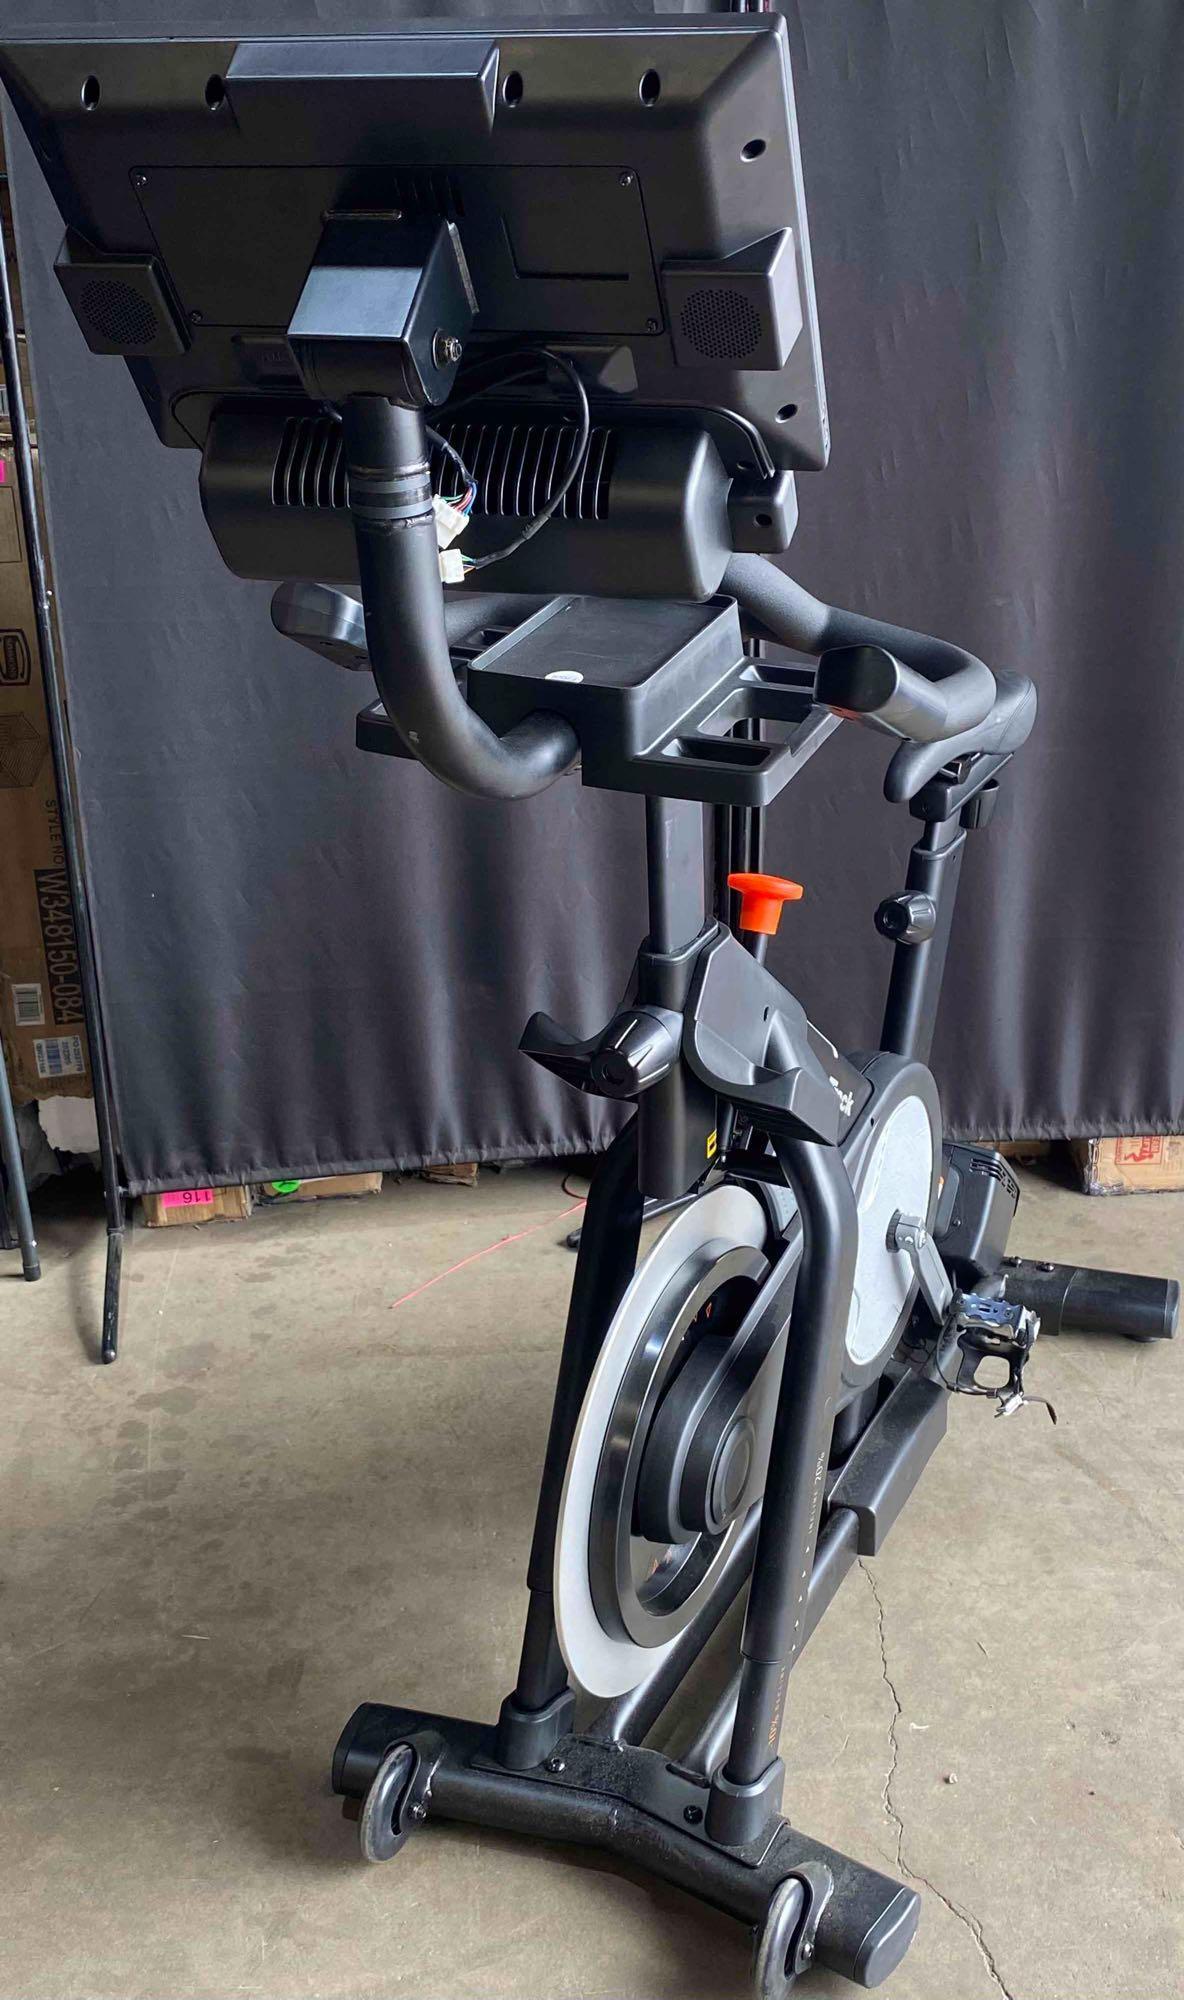 Nordictrack Commercial S15i Studio Cycle